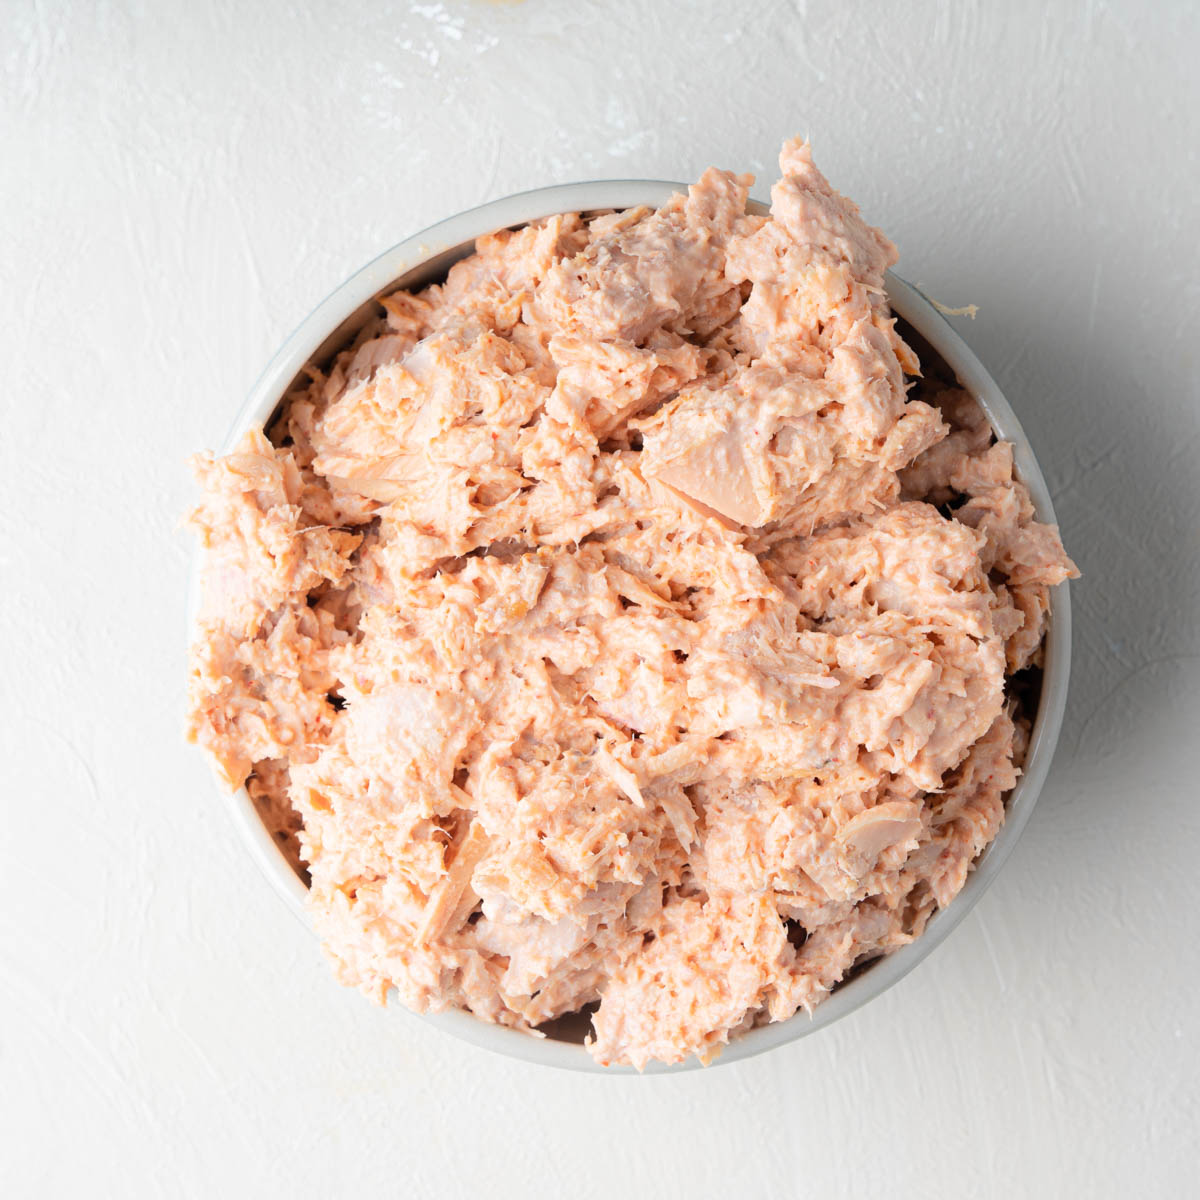 Spicy canned tuna with creamy mayo and siracha making the mixture a pink-ish hue, mixed and displayed in a bowl.